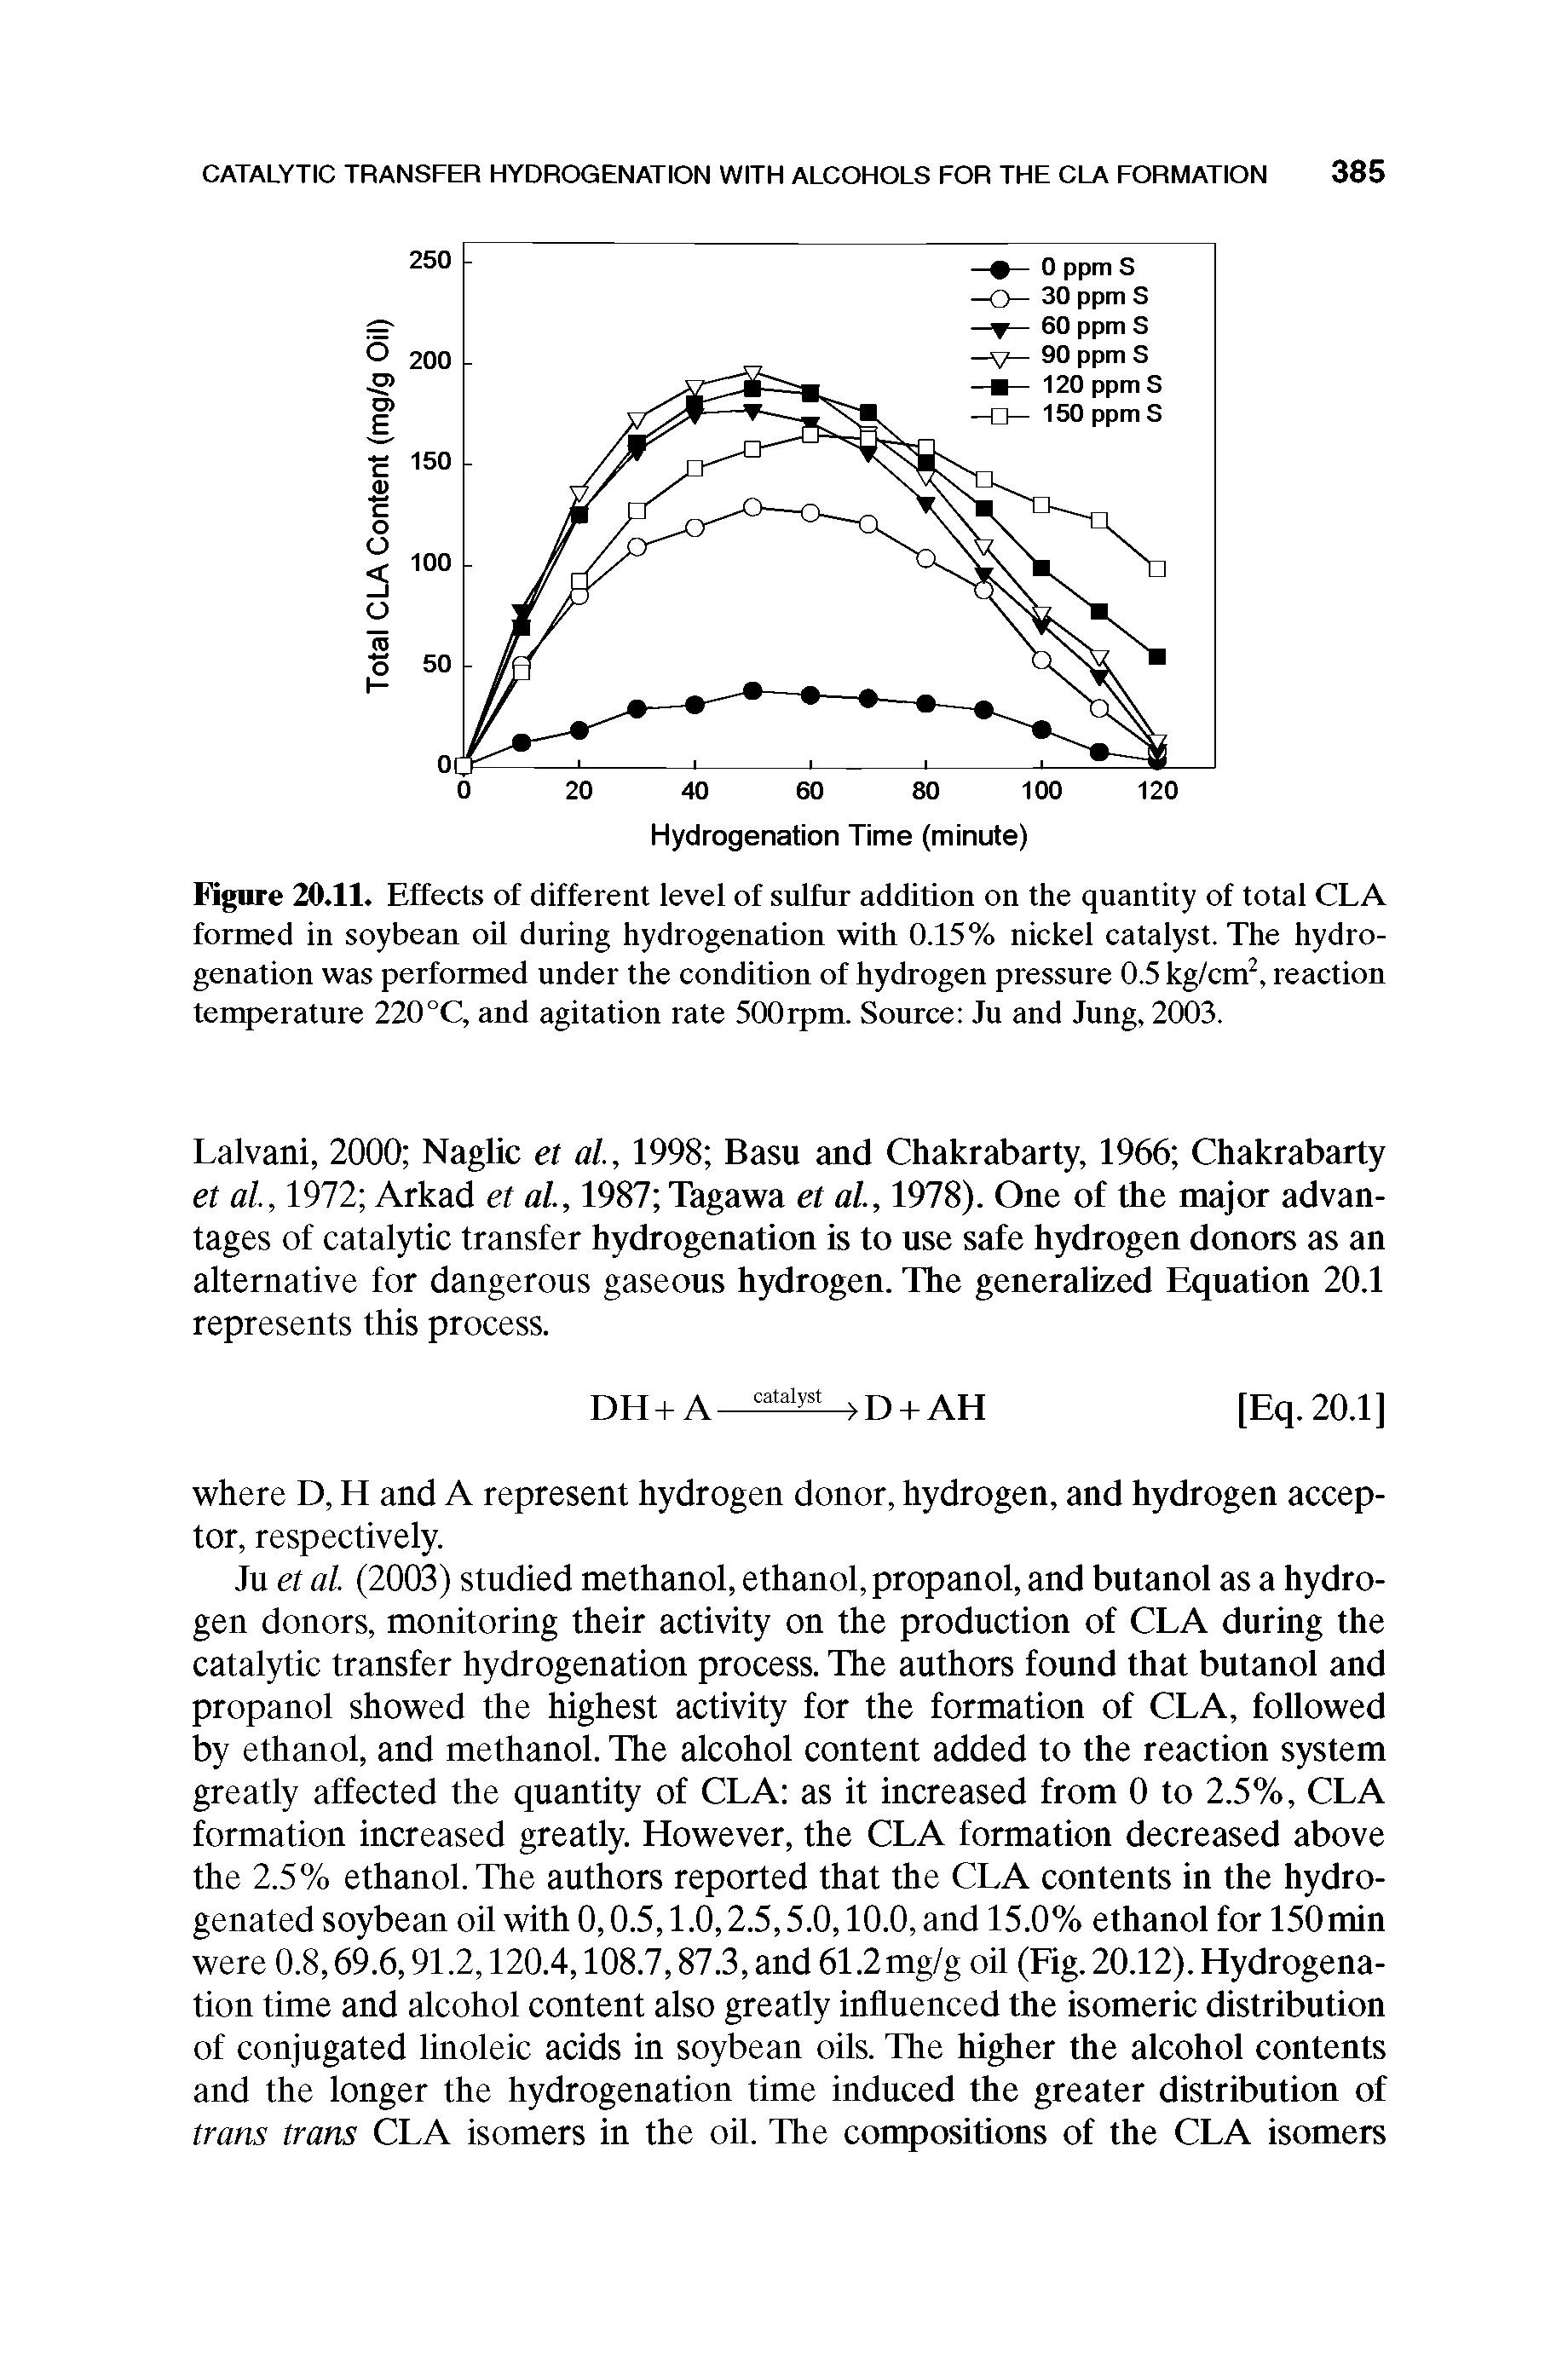 Figure 20.11. Effects of different level of sulfur addition on the quantity of total CLA formed in soybean oil during hydrogenation with 0.15% nickel catalyst. The hydrogenation was performed under the condition of hydrogen pressure 0.5 kg/cm2, reaction temperature 220°C, and agitation rate 500rpm. Source Ju and Jung, 2003.